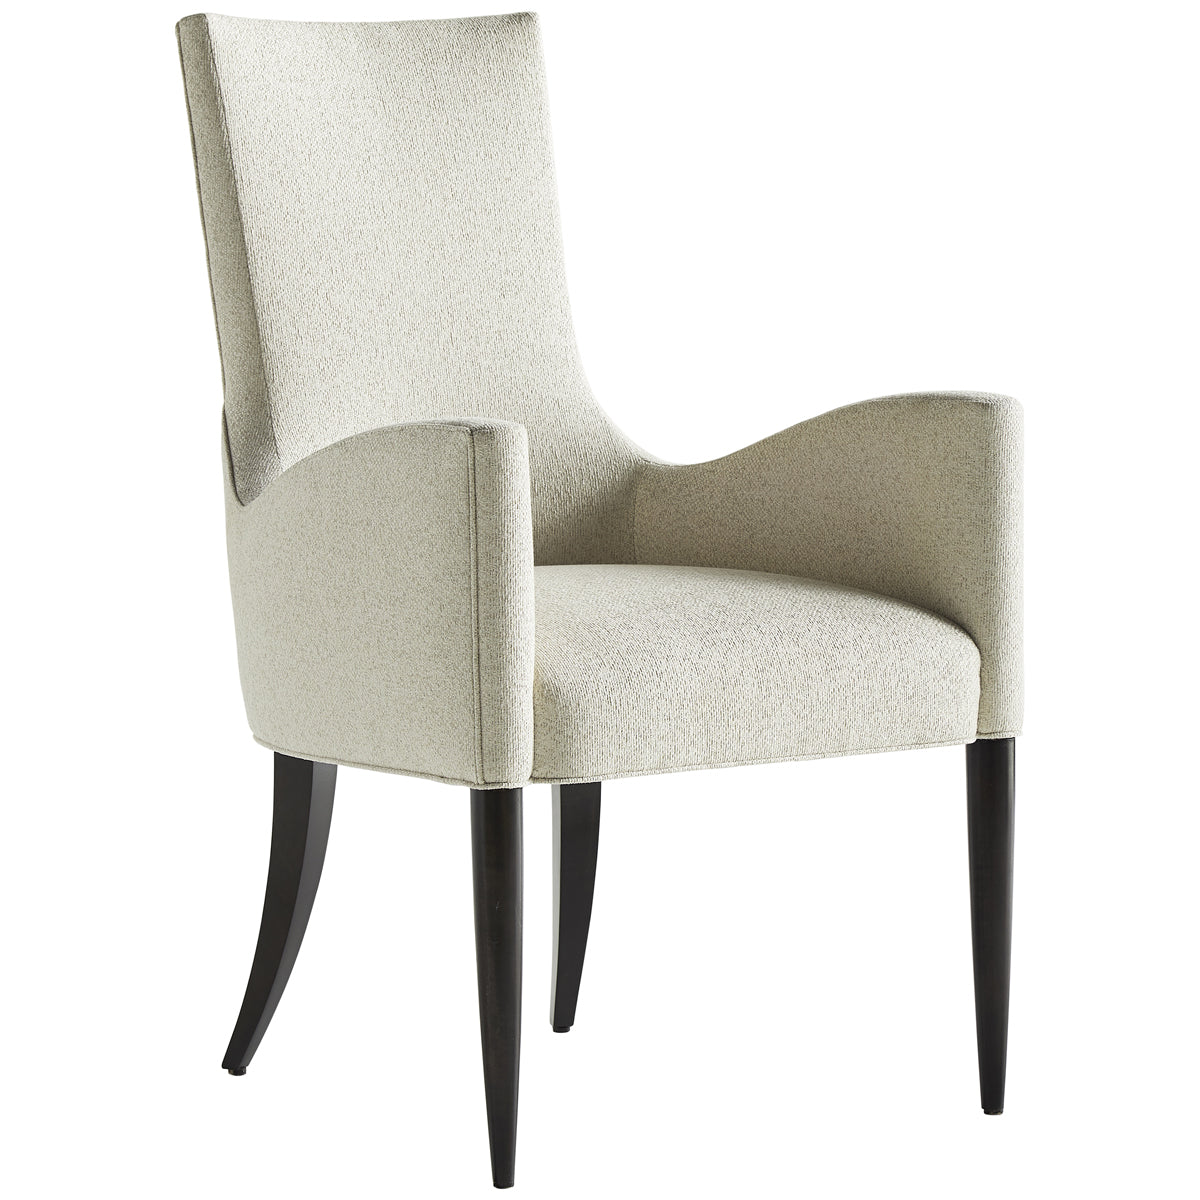 Vanguard Furniture Lillet Stocked Dining Arm Chair